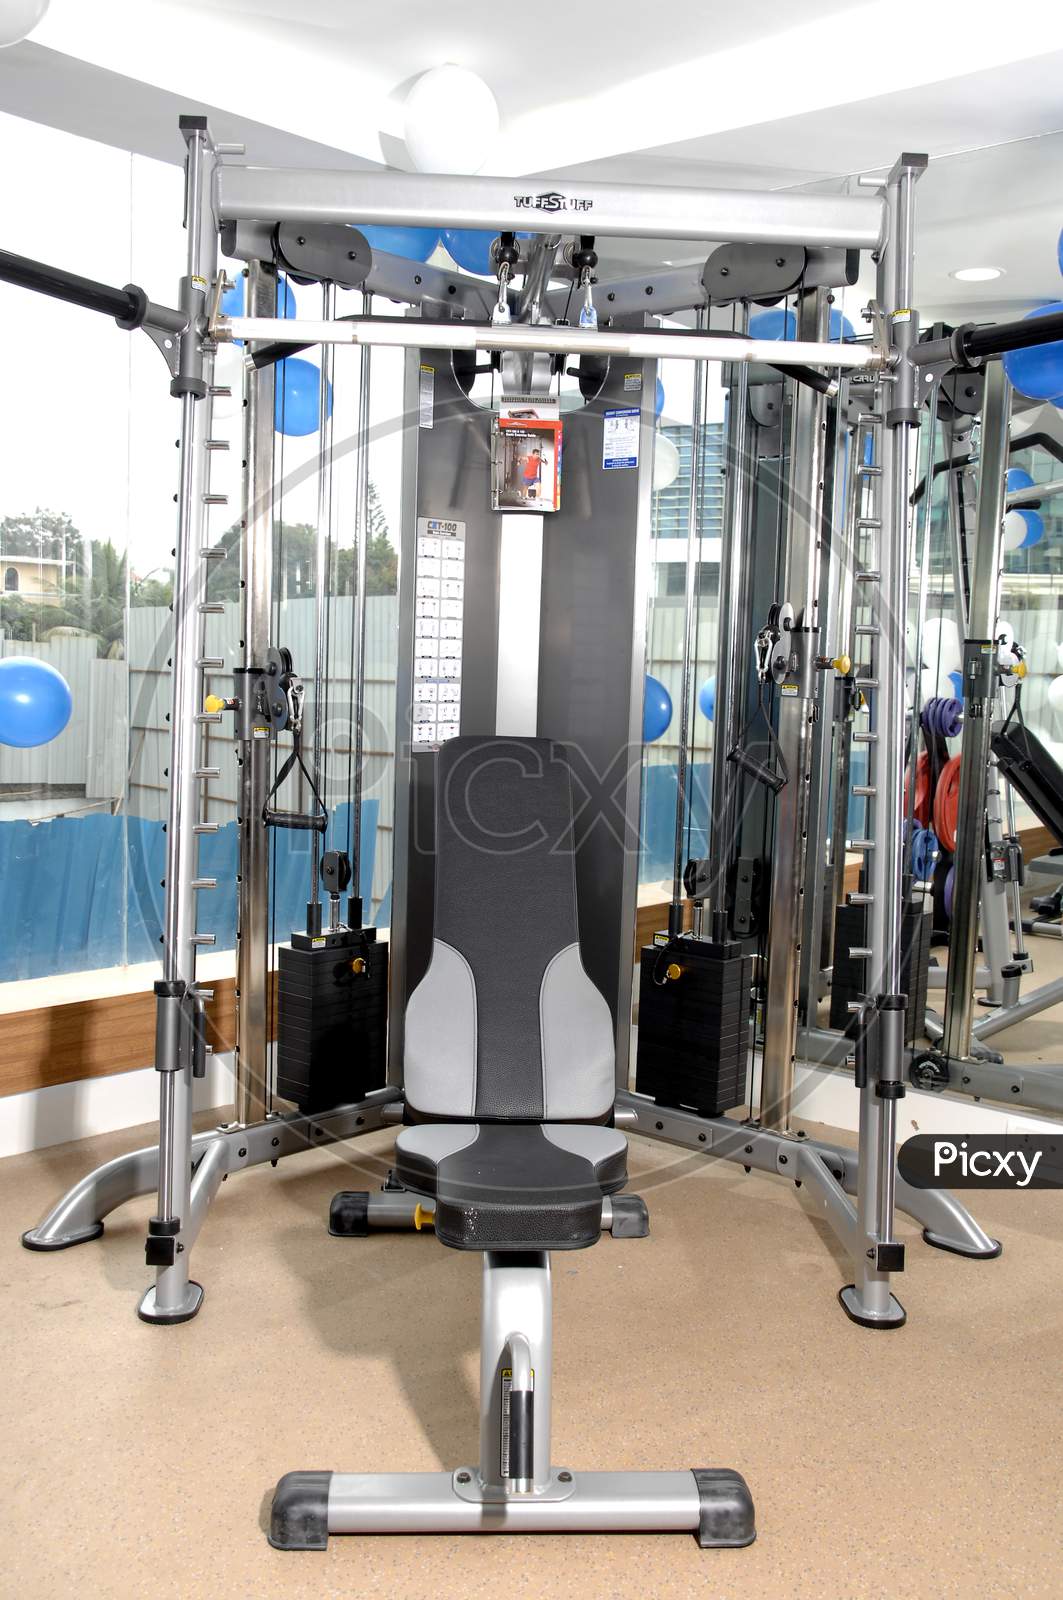 Weightlifting exercise machine in a gym